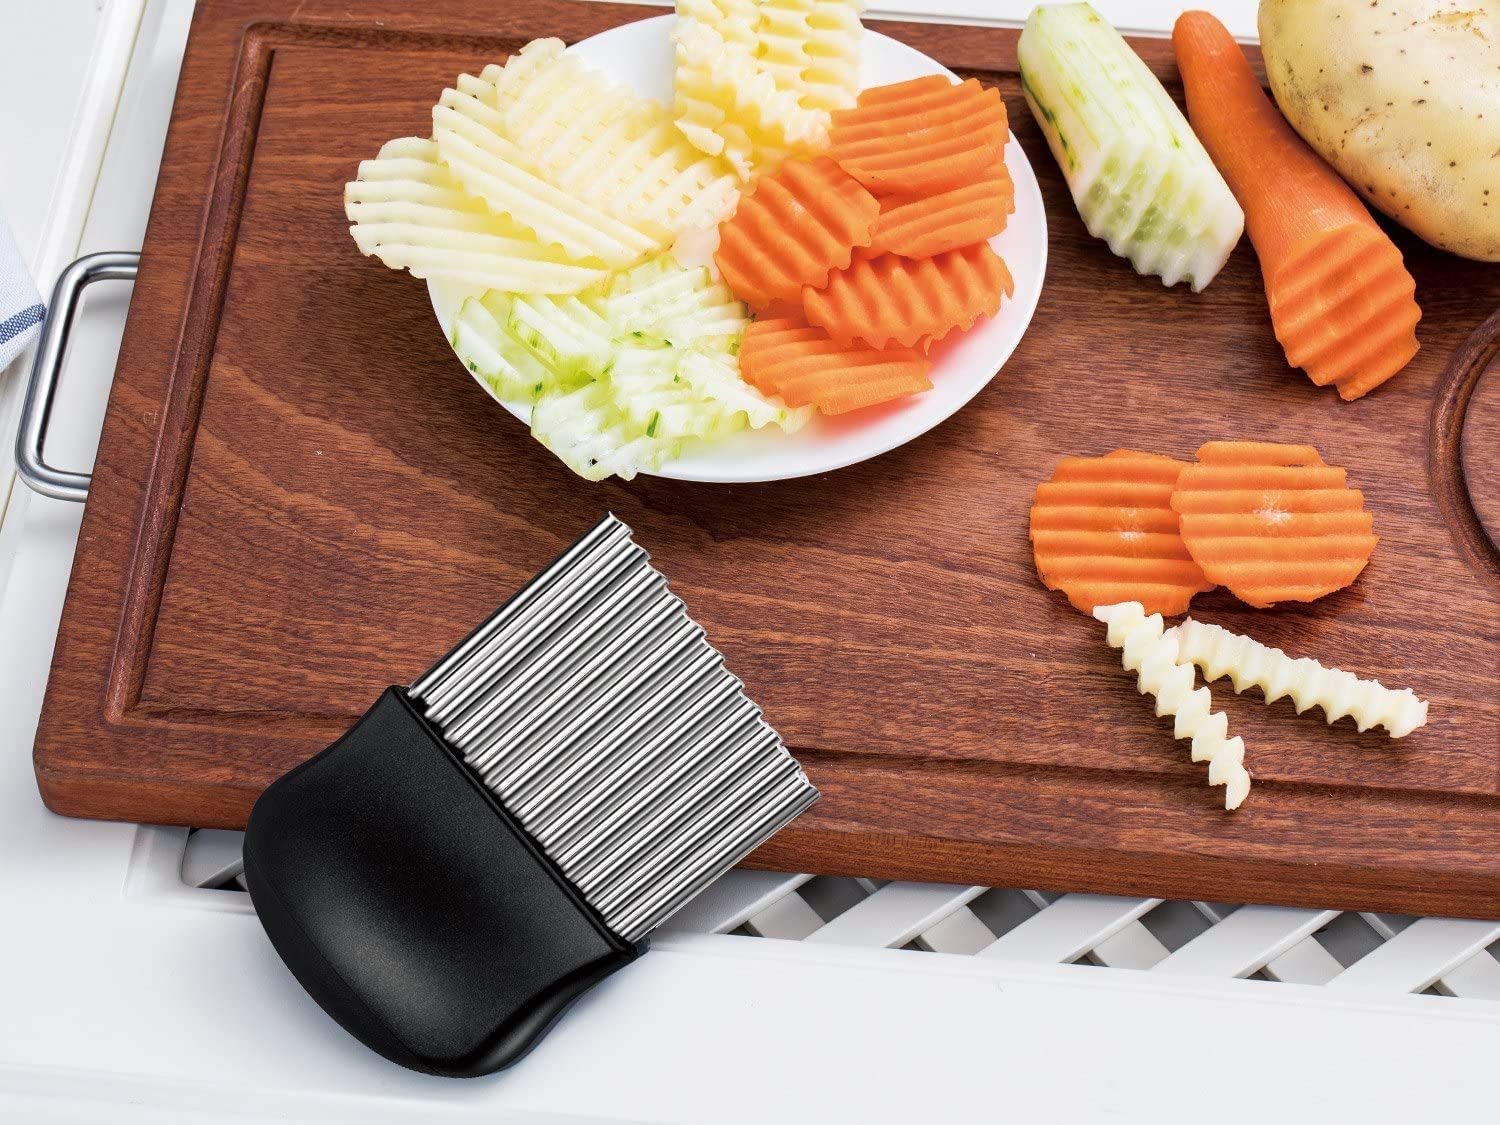 FREE - Potato Crinkle Cutter, Stainless Steel Crinkle Cutting Tool, Potato Fry Cutter. - e4cents